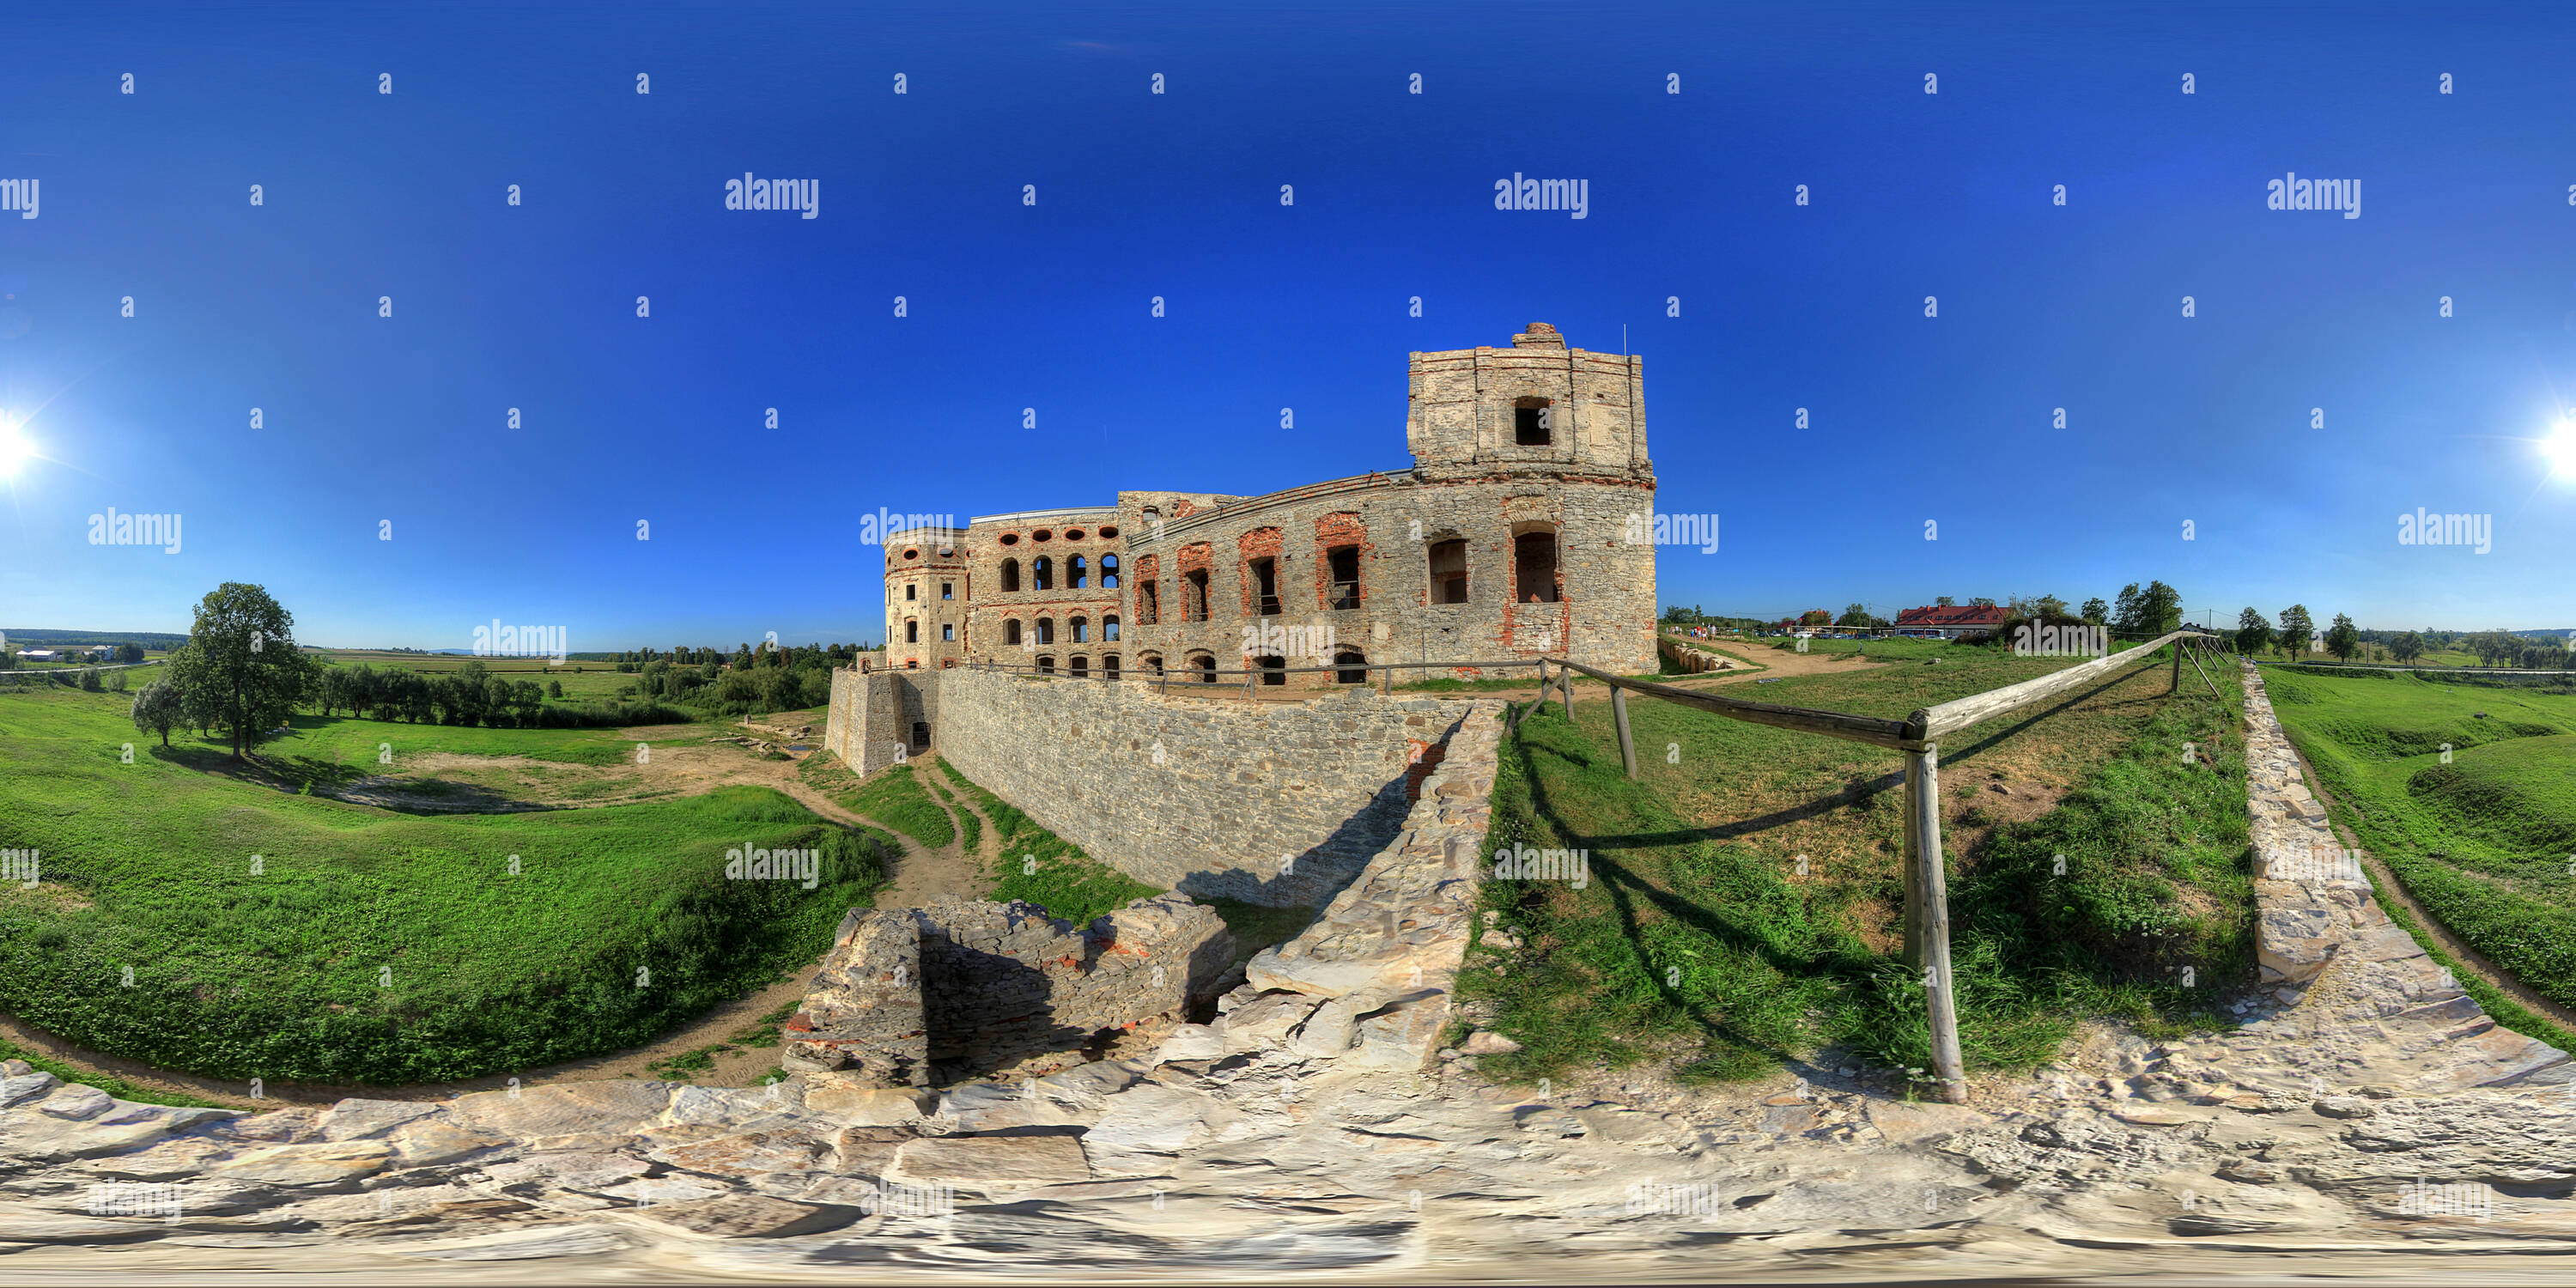 360 degree panoramic view of Ruins Of Krzyztopor, Ossolinski's Palace (062)